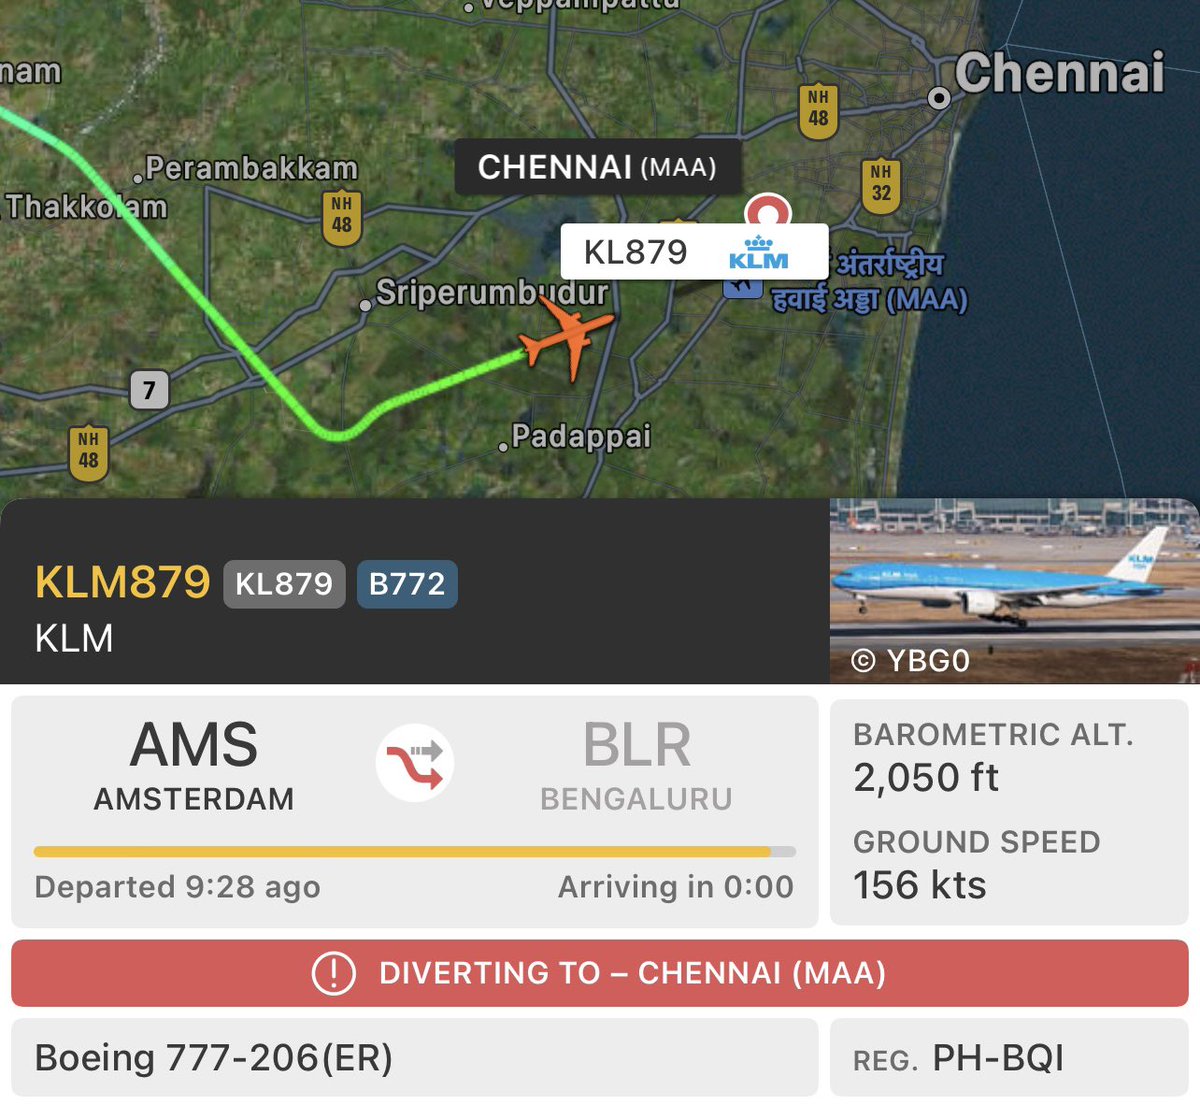 After probably decades or so a KLM is arriving at Chennai albeit a diversion from Bengaluru due to weather.

I remember occasionally seeing a KLM Cargo B747 at Chennai around the years of 2010 or so.

#aerowanderer #aviation #KLM #b777 #chennai #chennaiairport #bengaluru